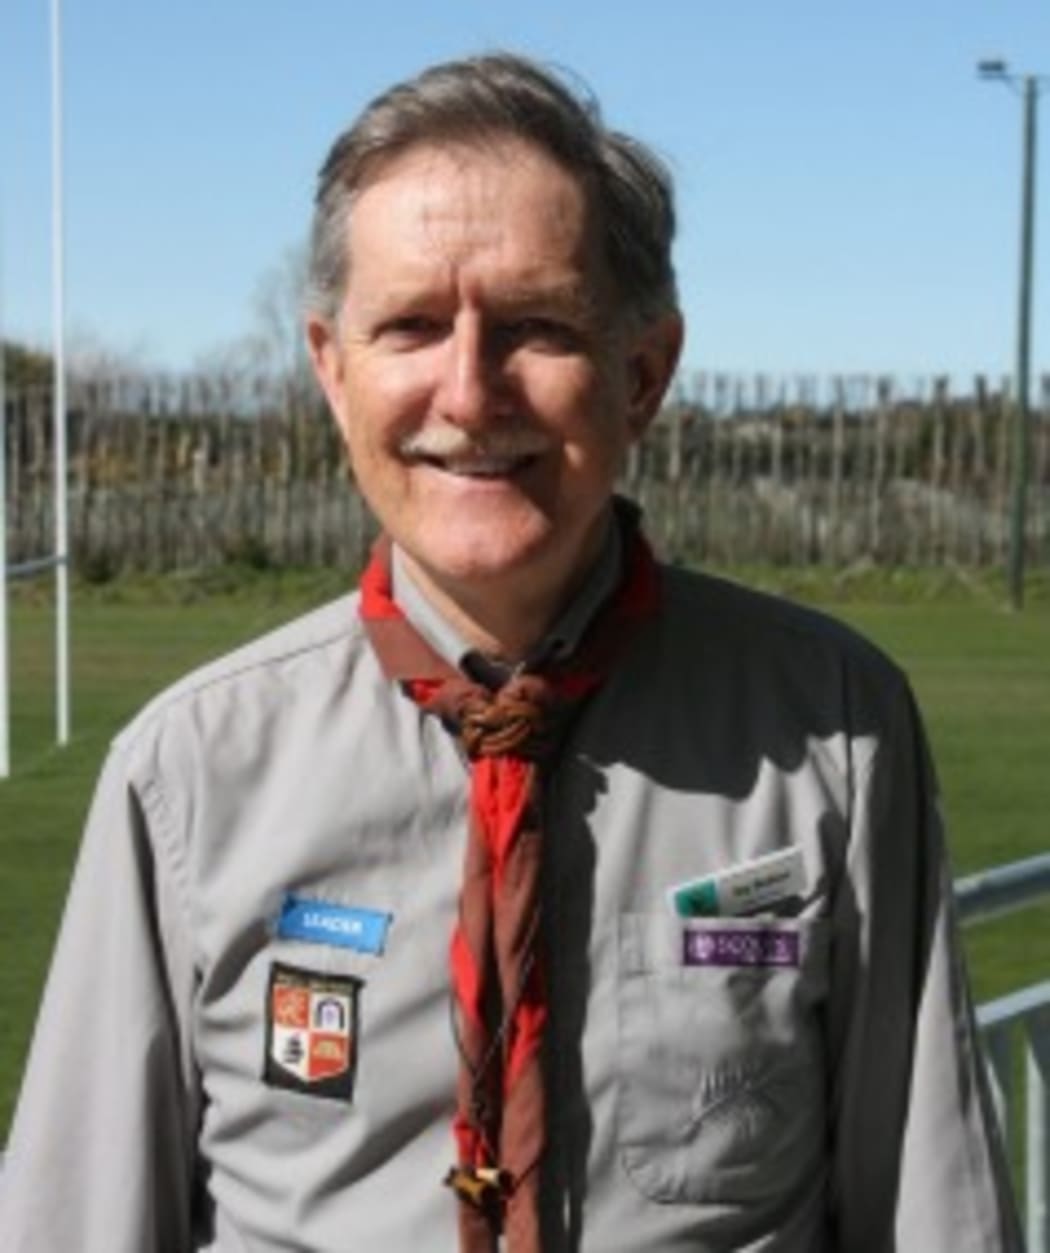 A picute of Jamboree Director Guy Betson from Scouts